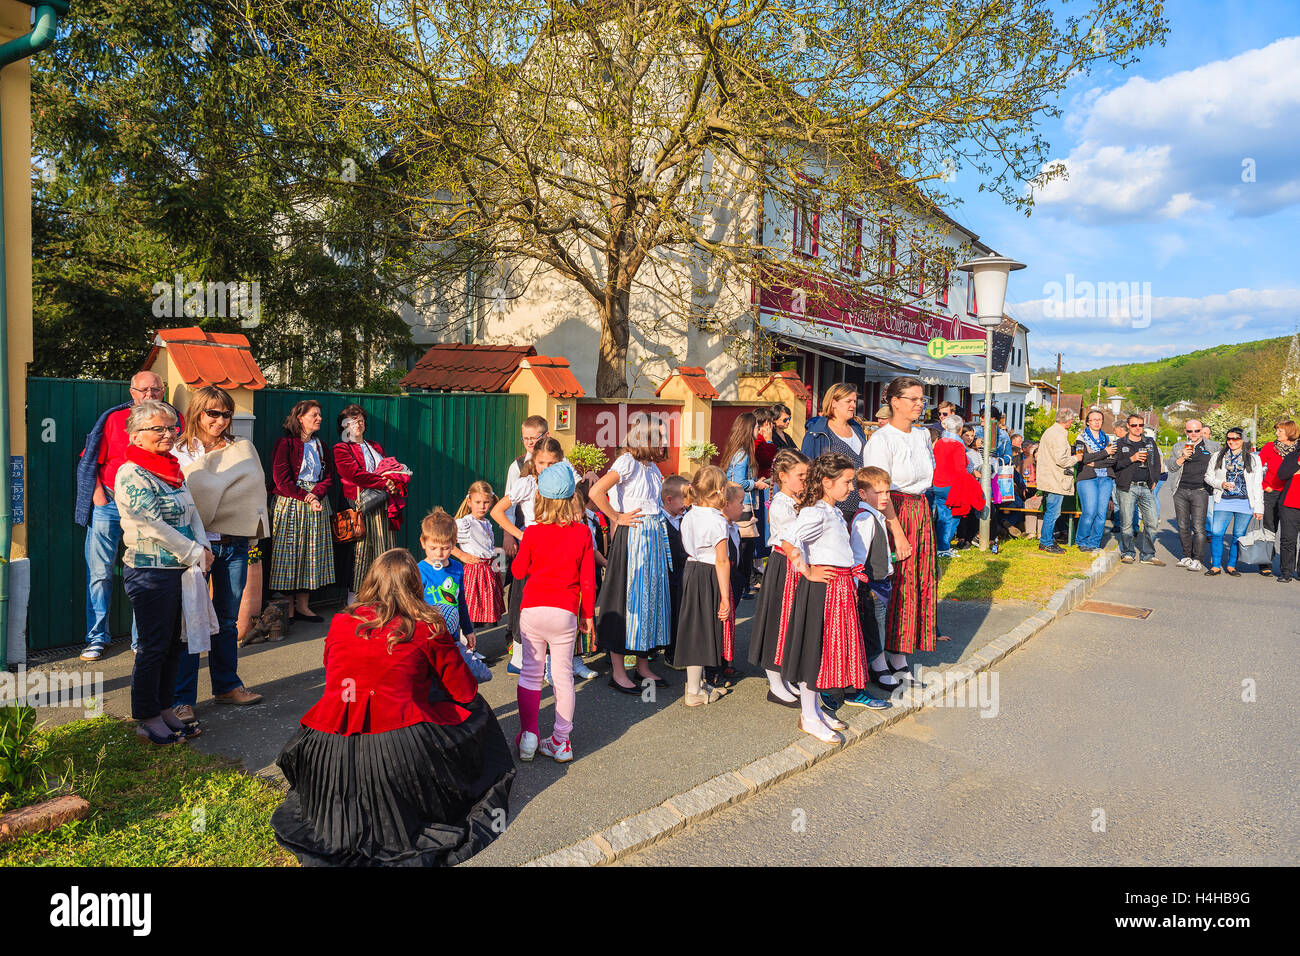 GLASING VILLAGE, AUSTRIA - APR 30, 2016: people watching dancing on street during May Tree celebration. In Germany and Austria t Stock Photo